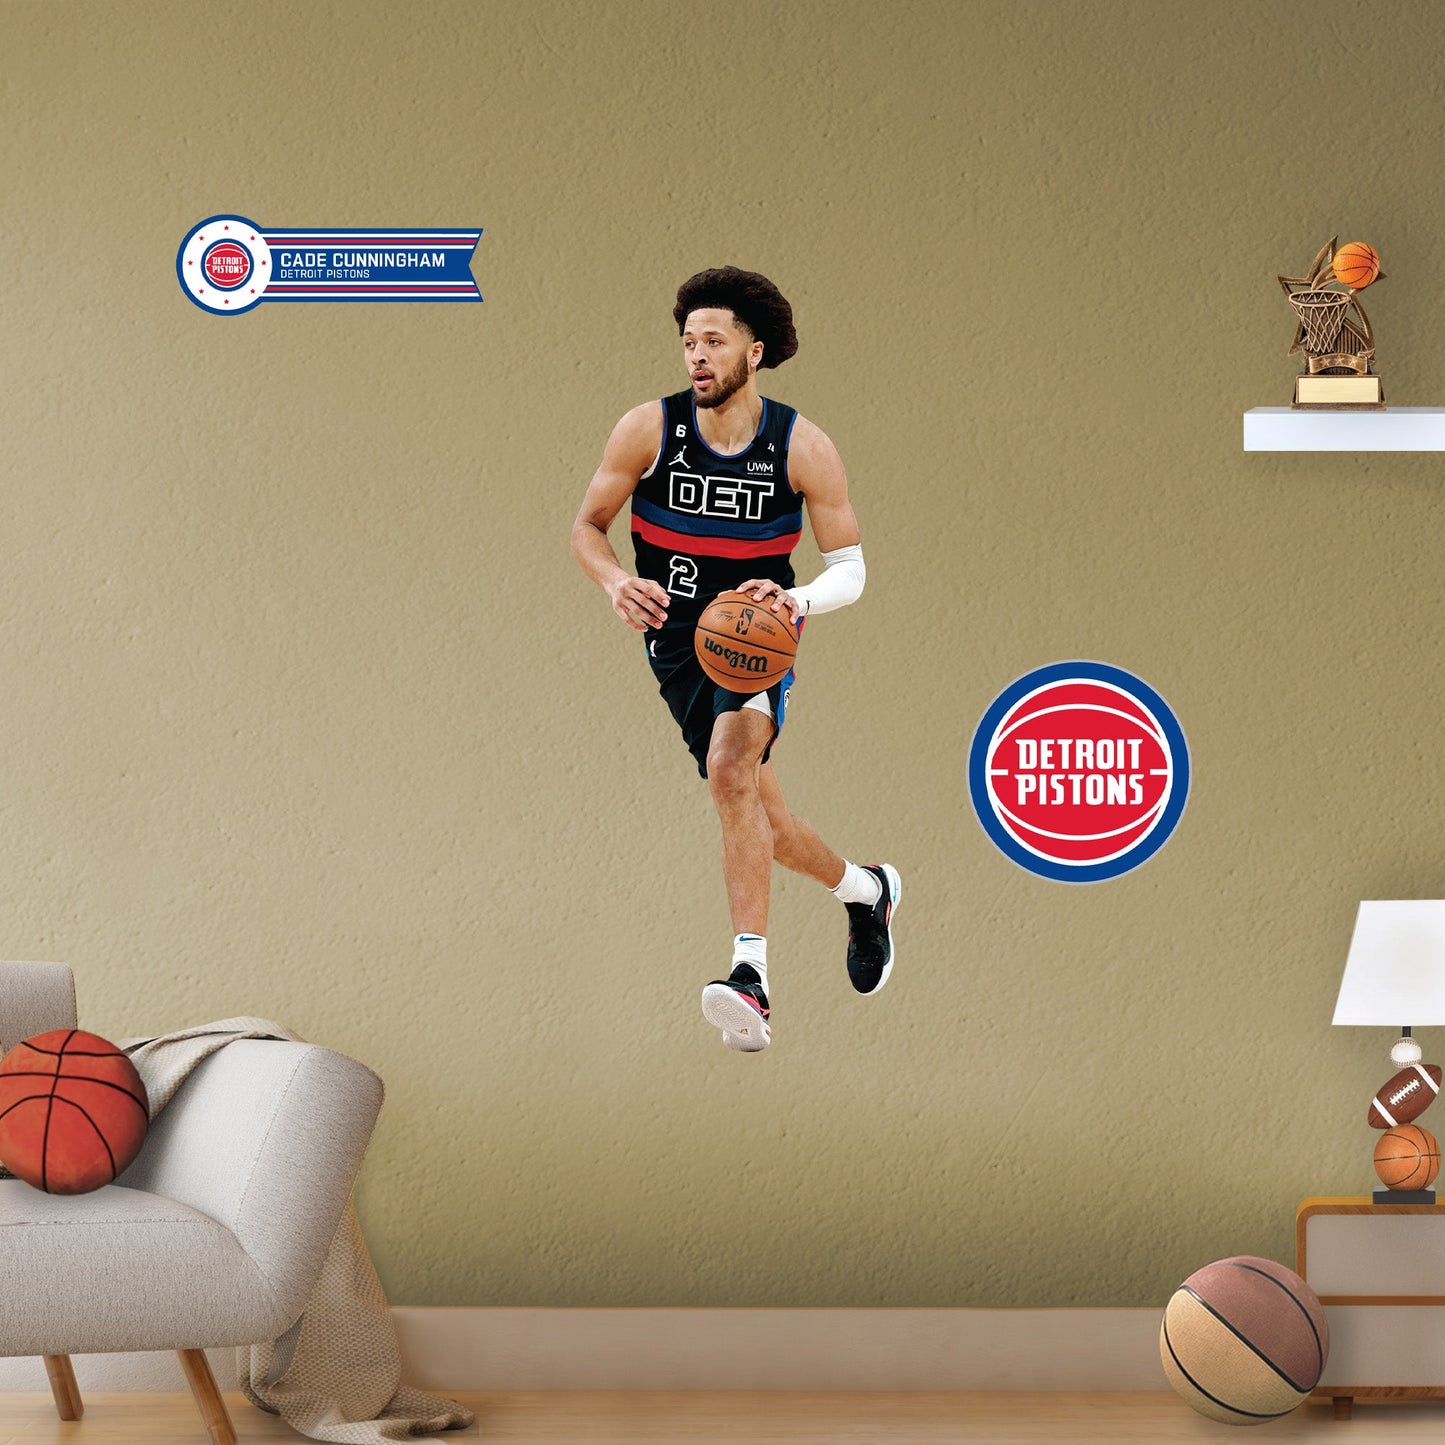 Detroit Pistons: Cade Cunningham City Jersey - Officially Licensed NBA Removable Adhesive Decal